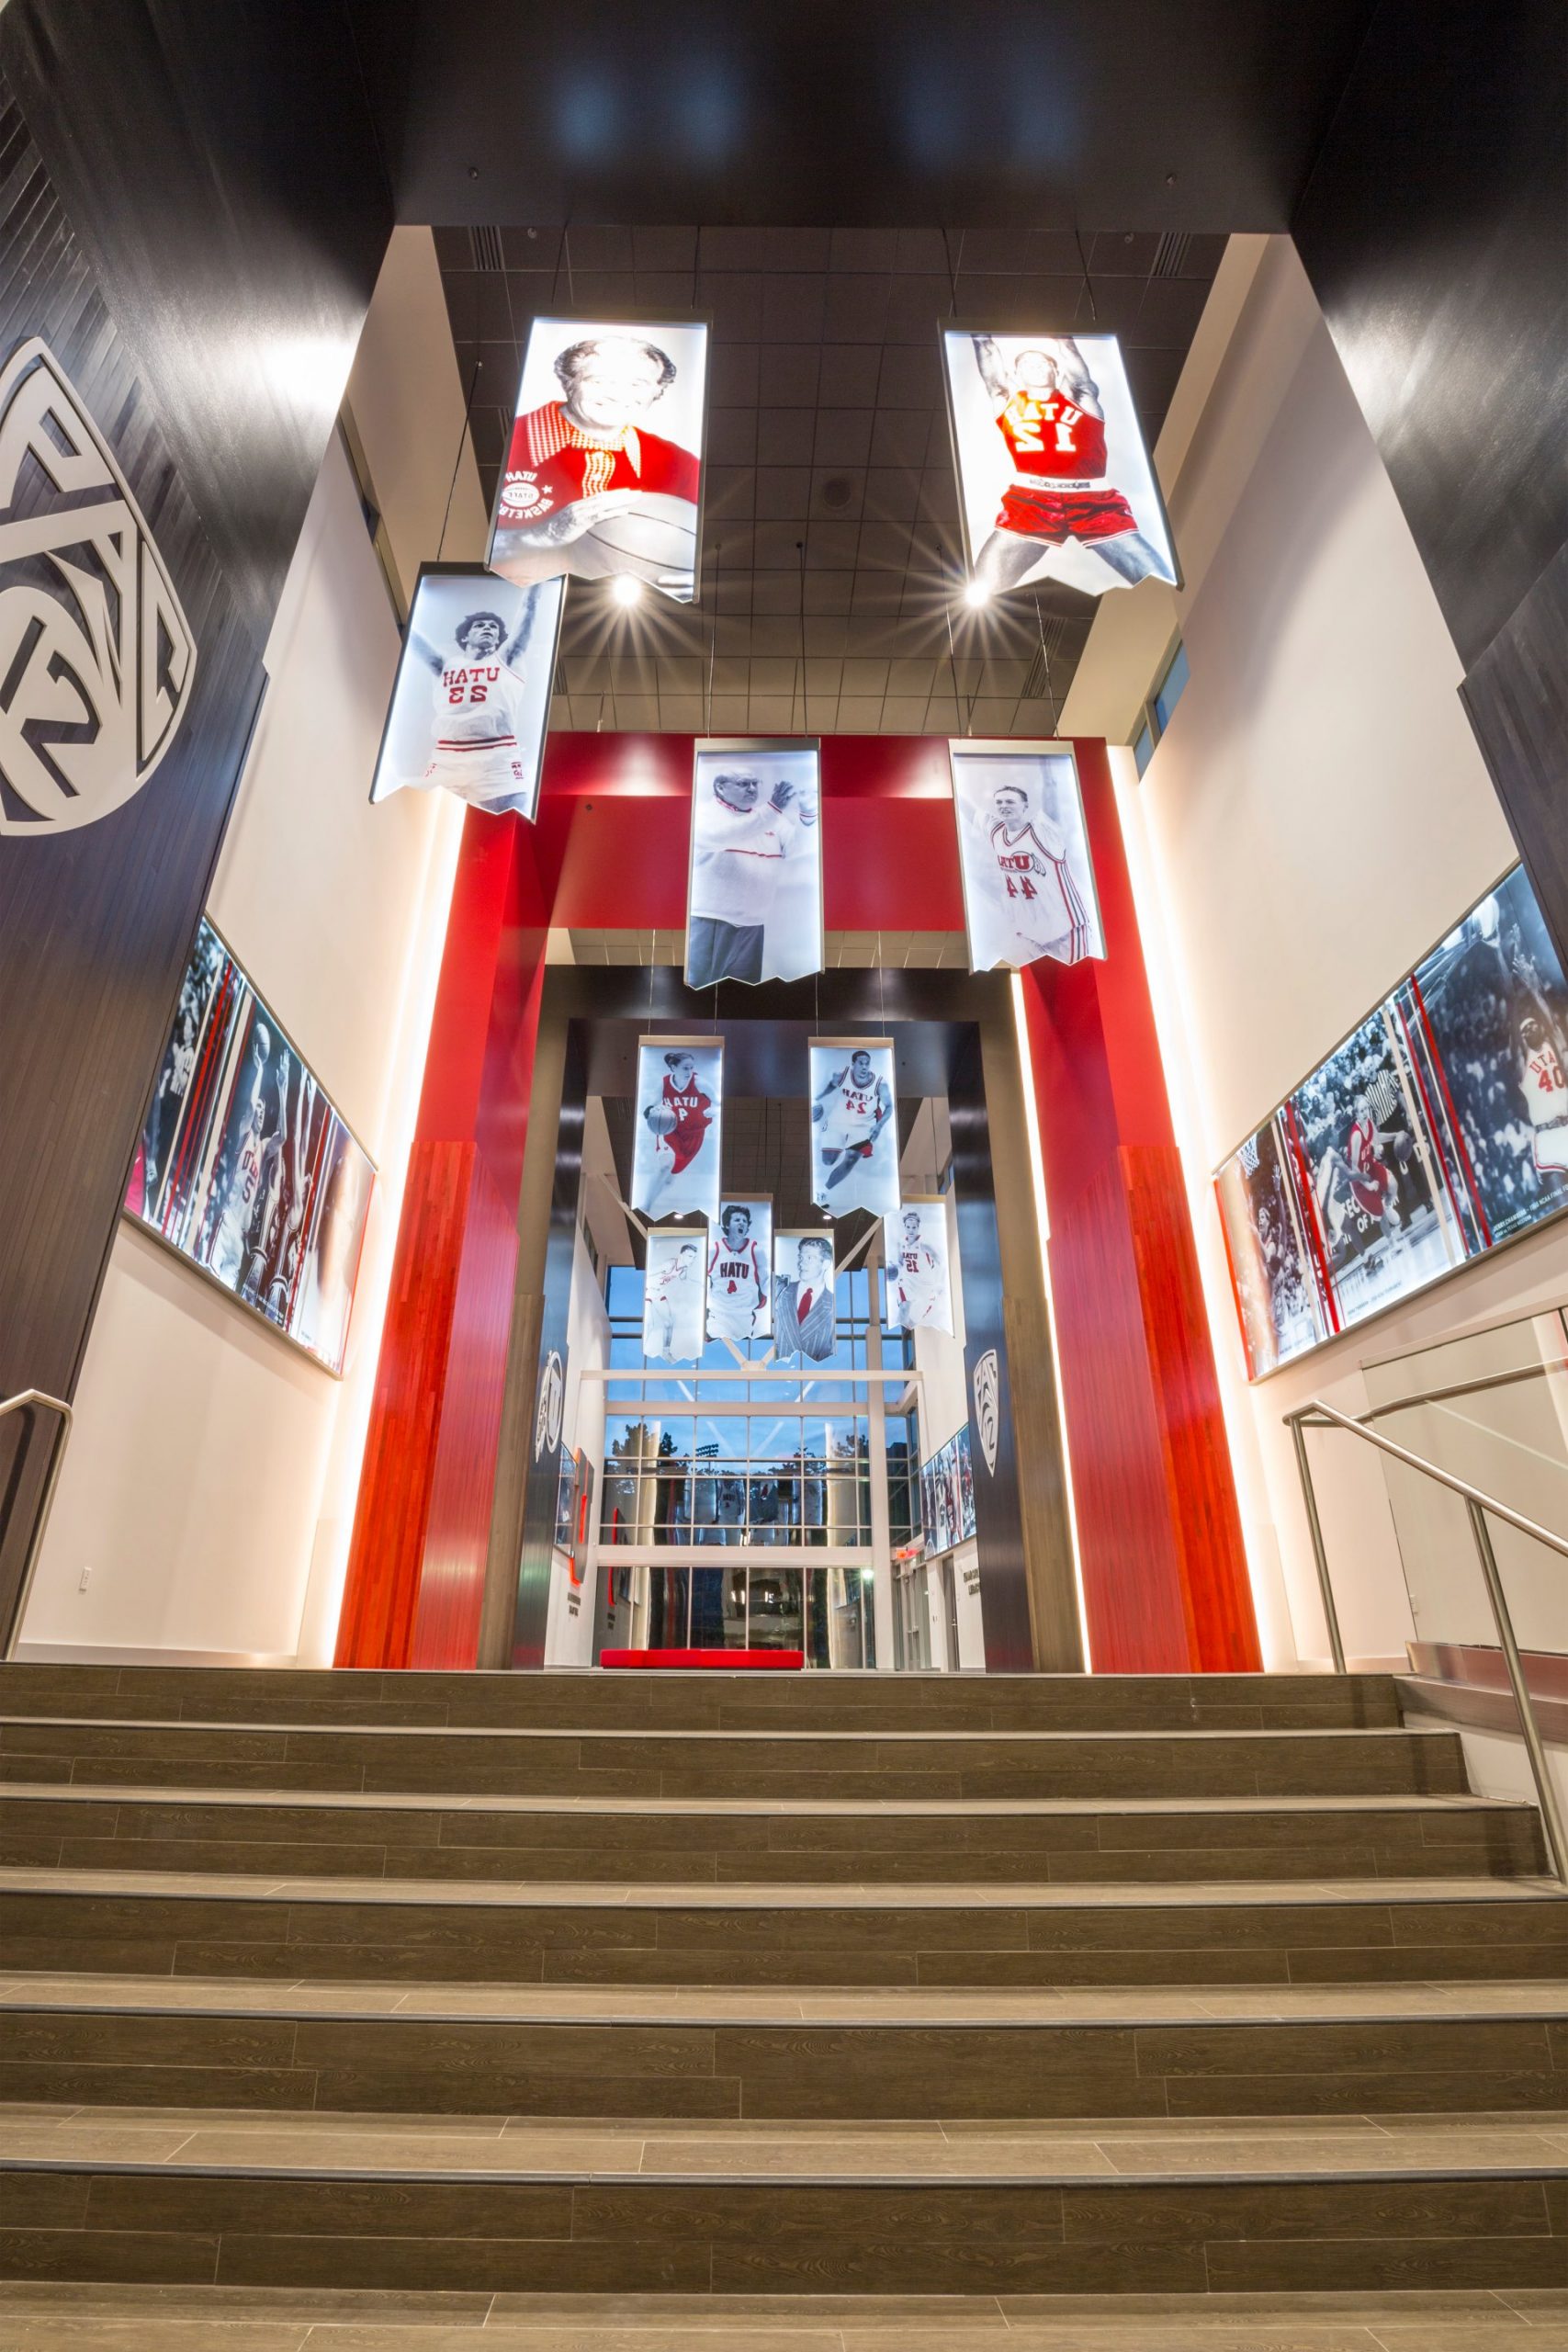 Hall of Fame, University of Utah Basketball Facility, architectural design by Elliott Workgroup